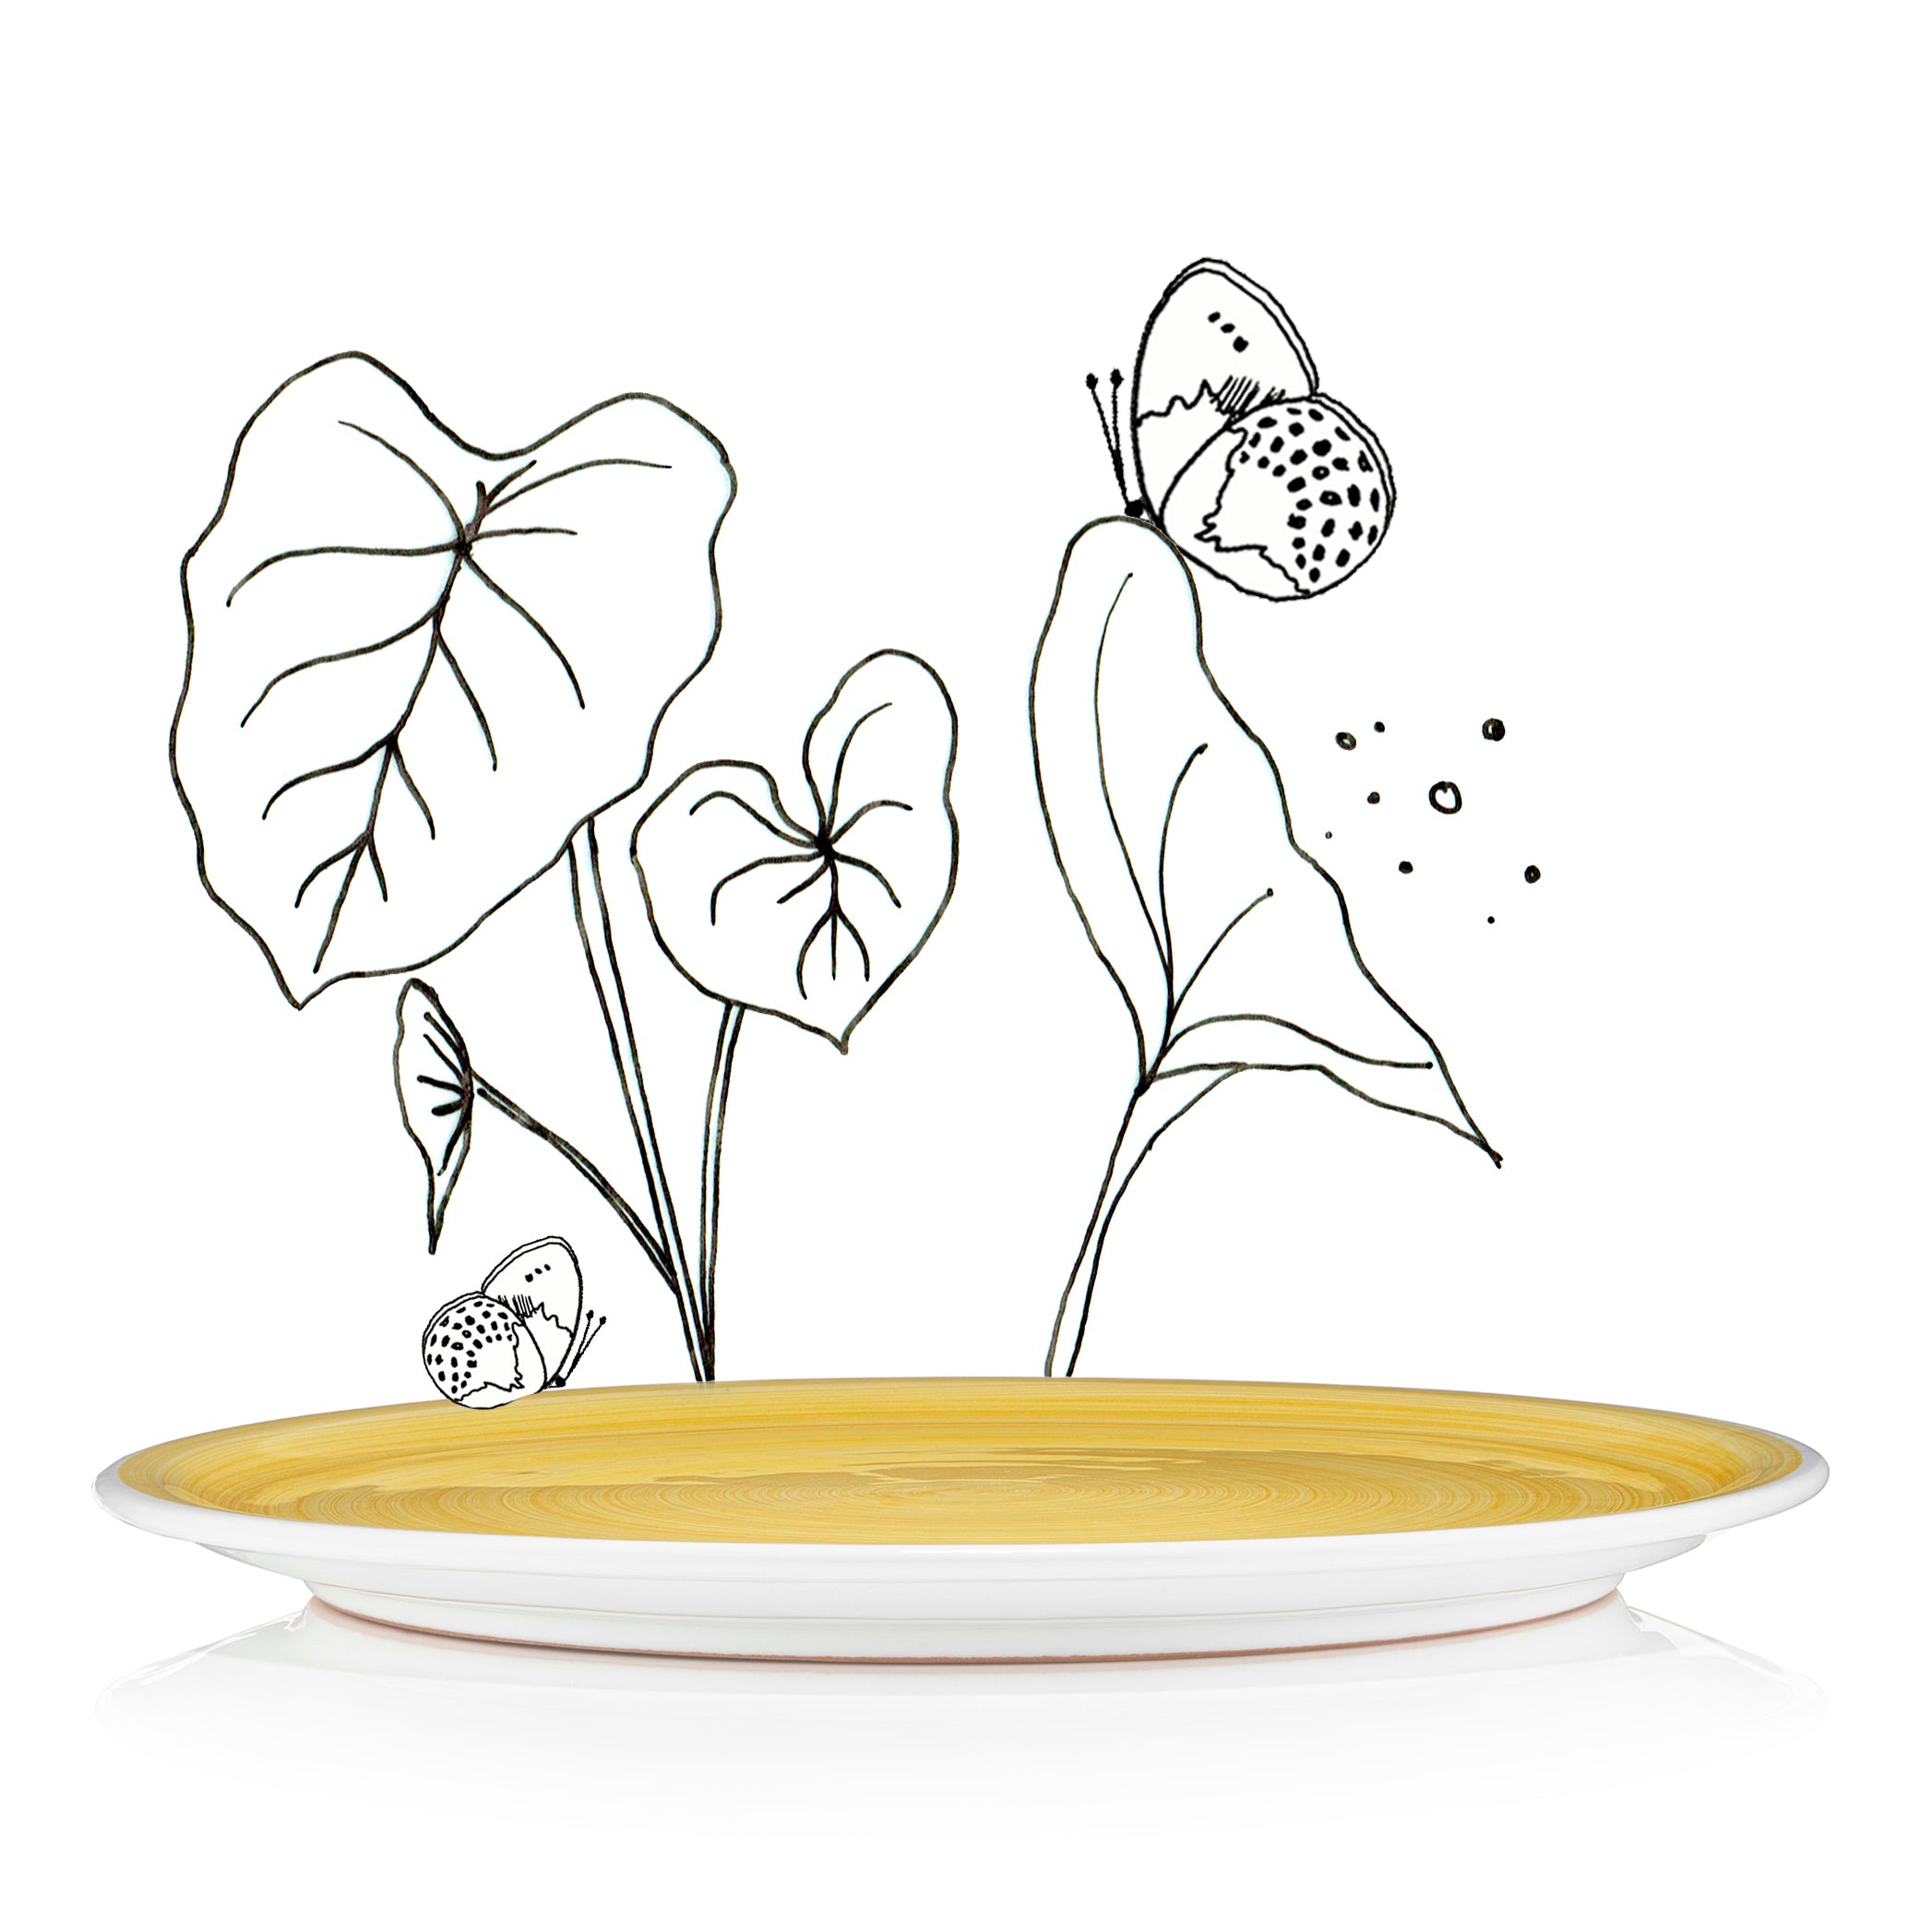 S&B 'Brushed' Ceramic Dinner Plate in Yellow, 30cm